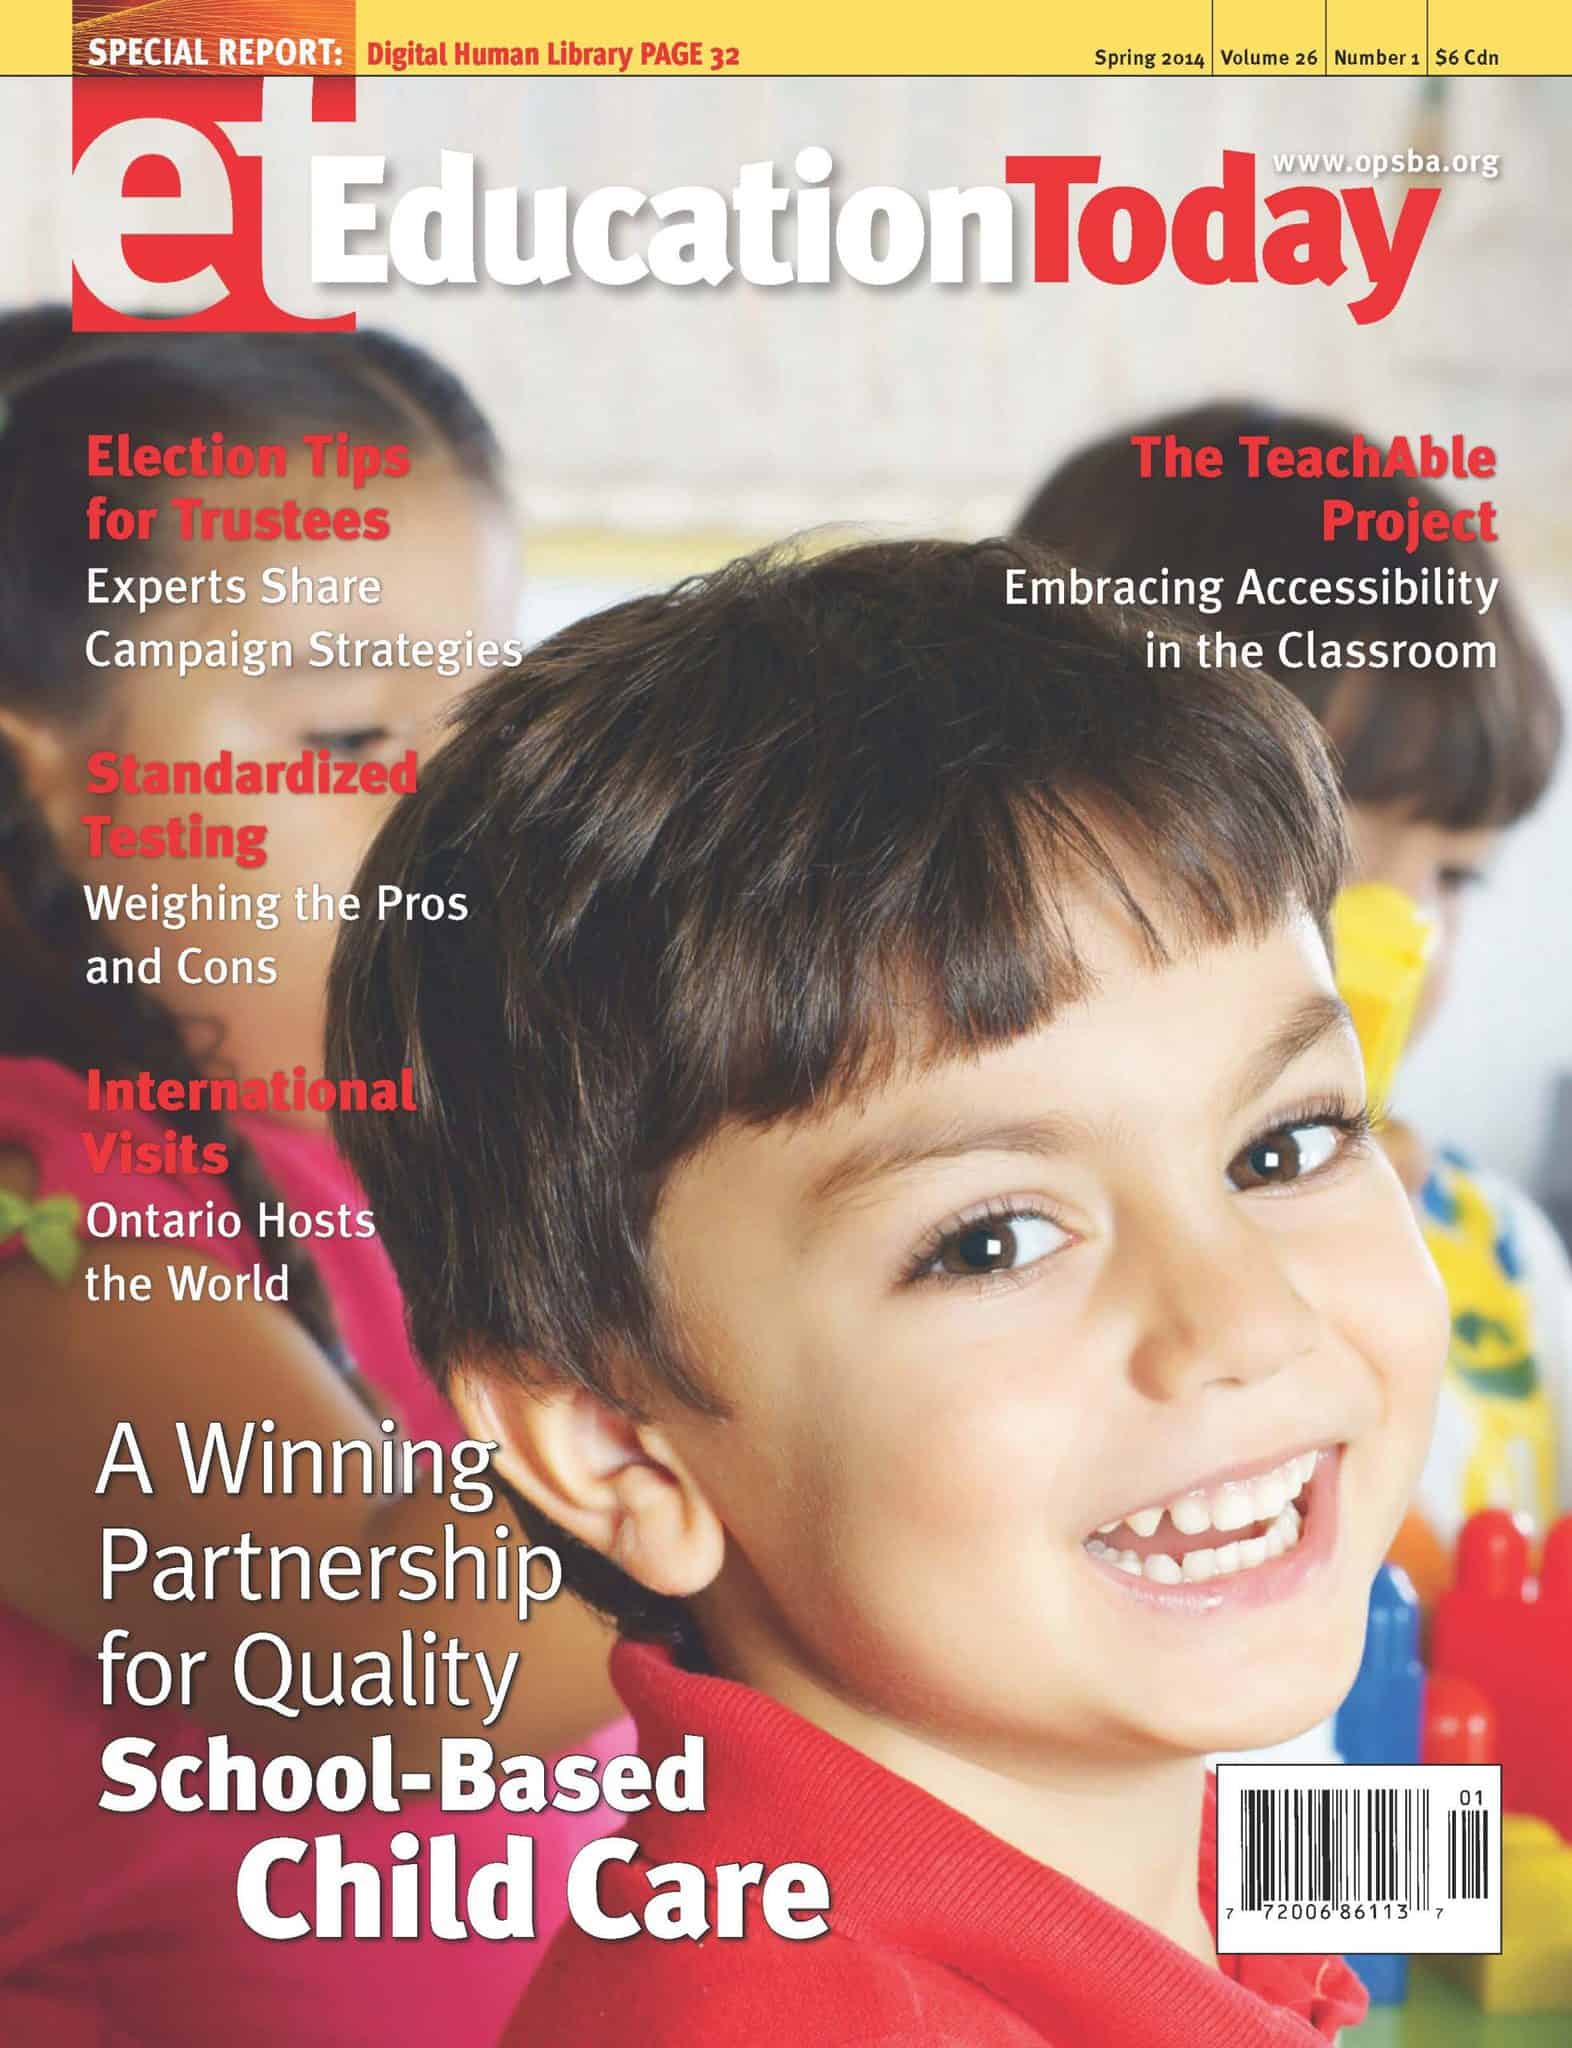 Education Today | Spring 2014 | Volume 26 Number 1